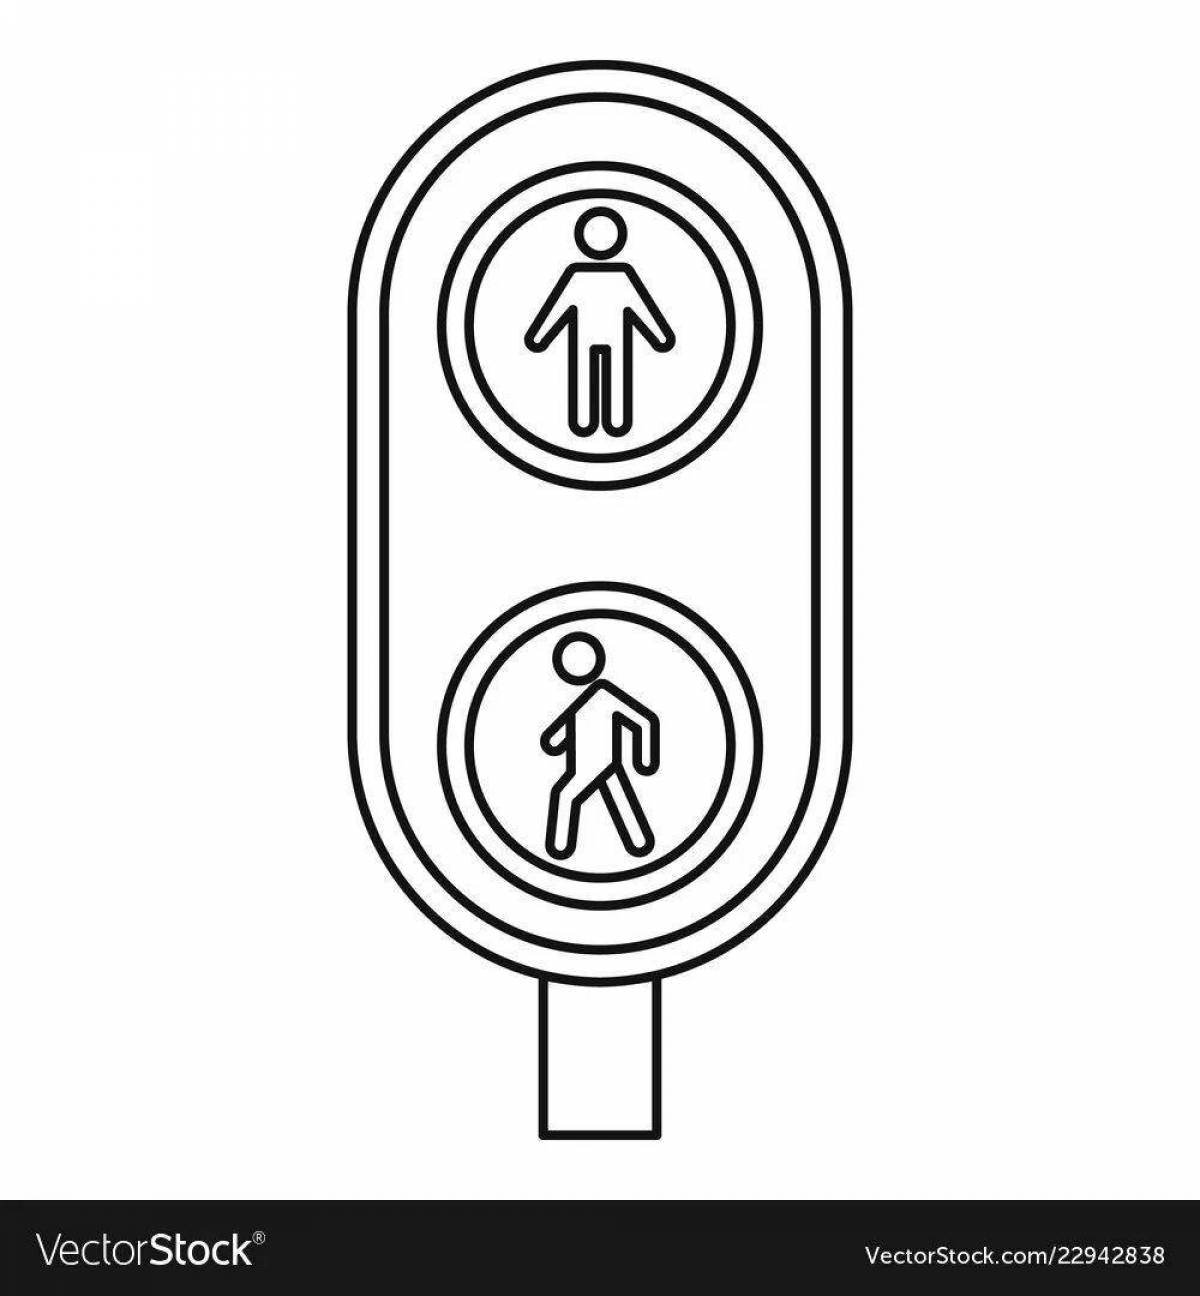 Coloring page dazzling traffic light